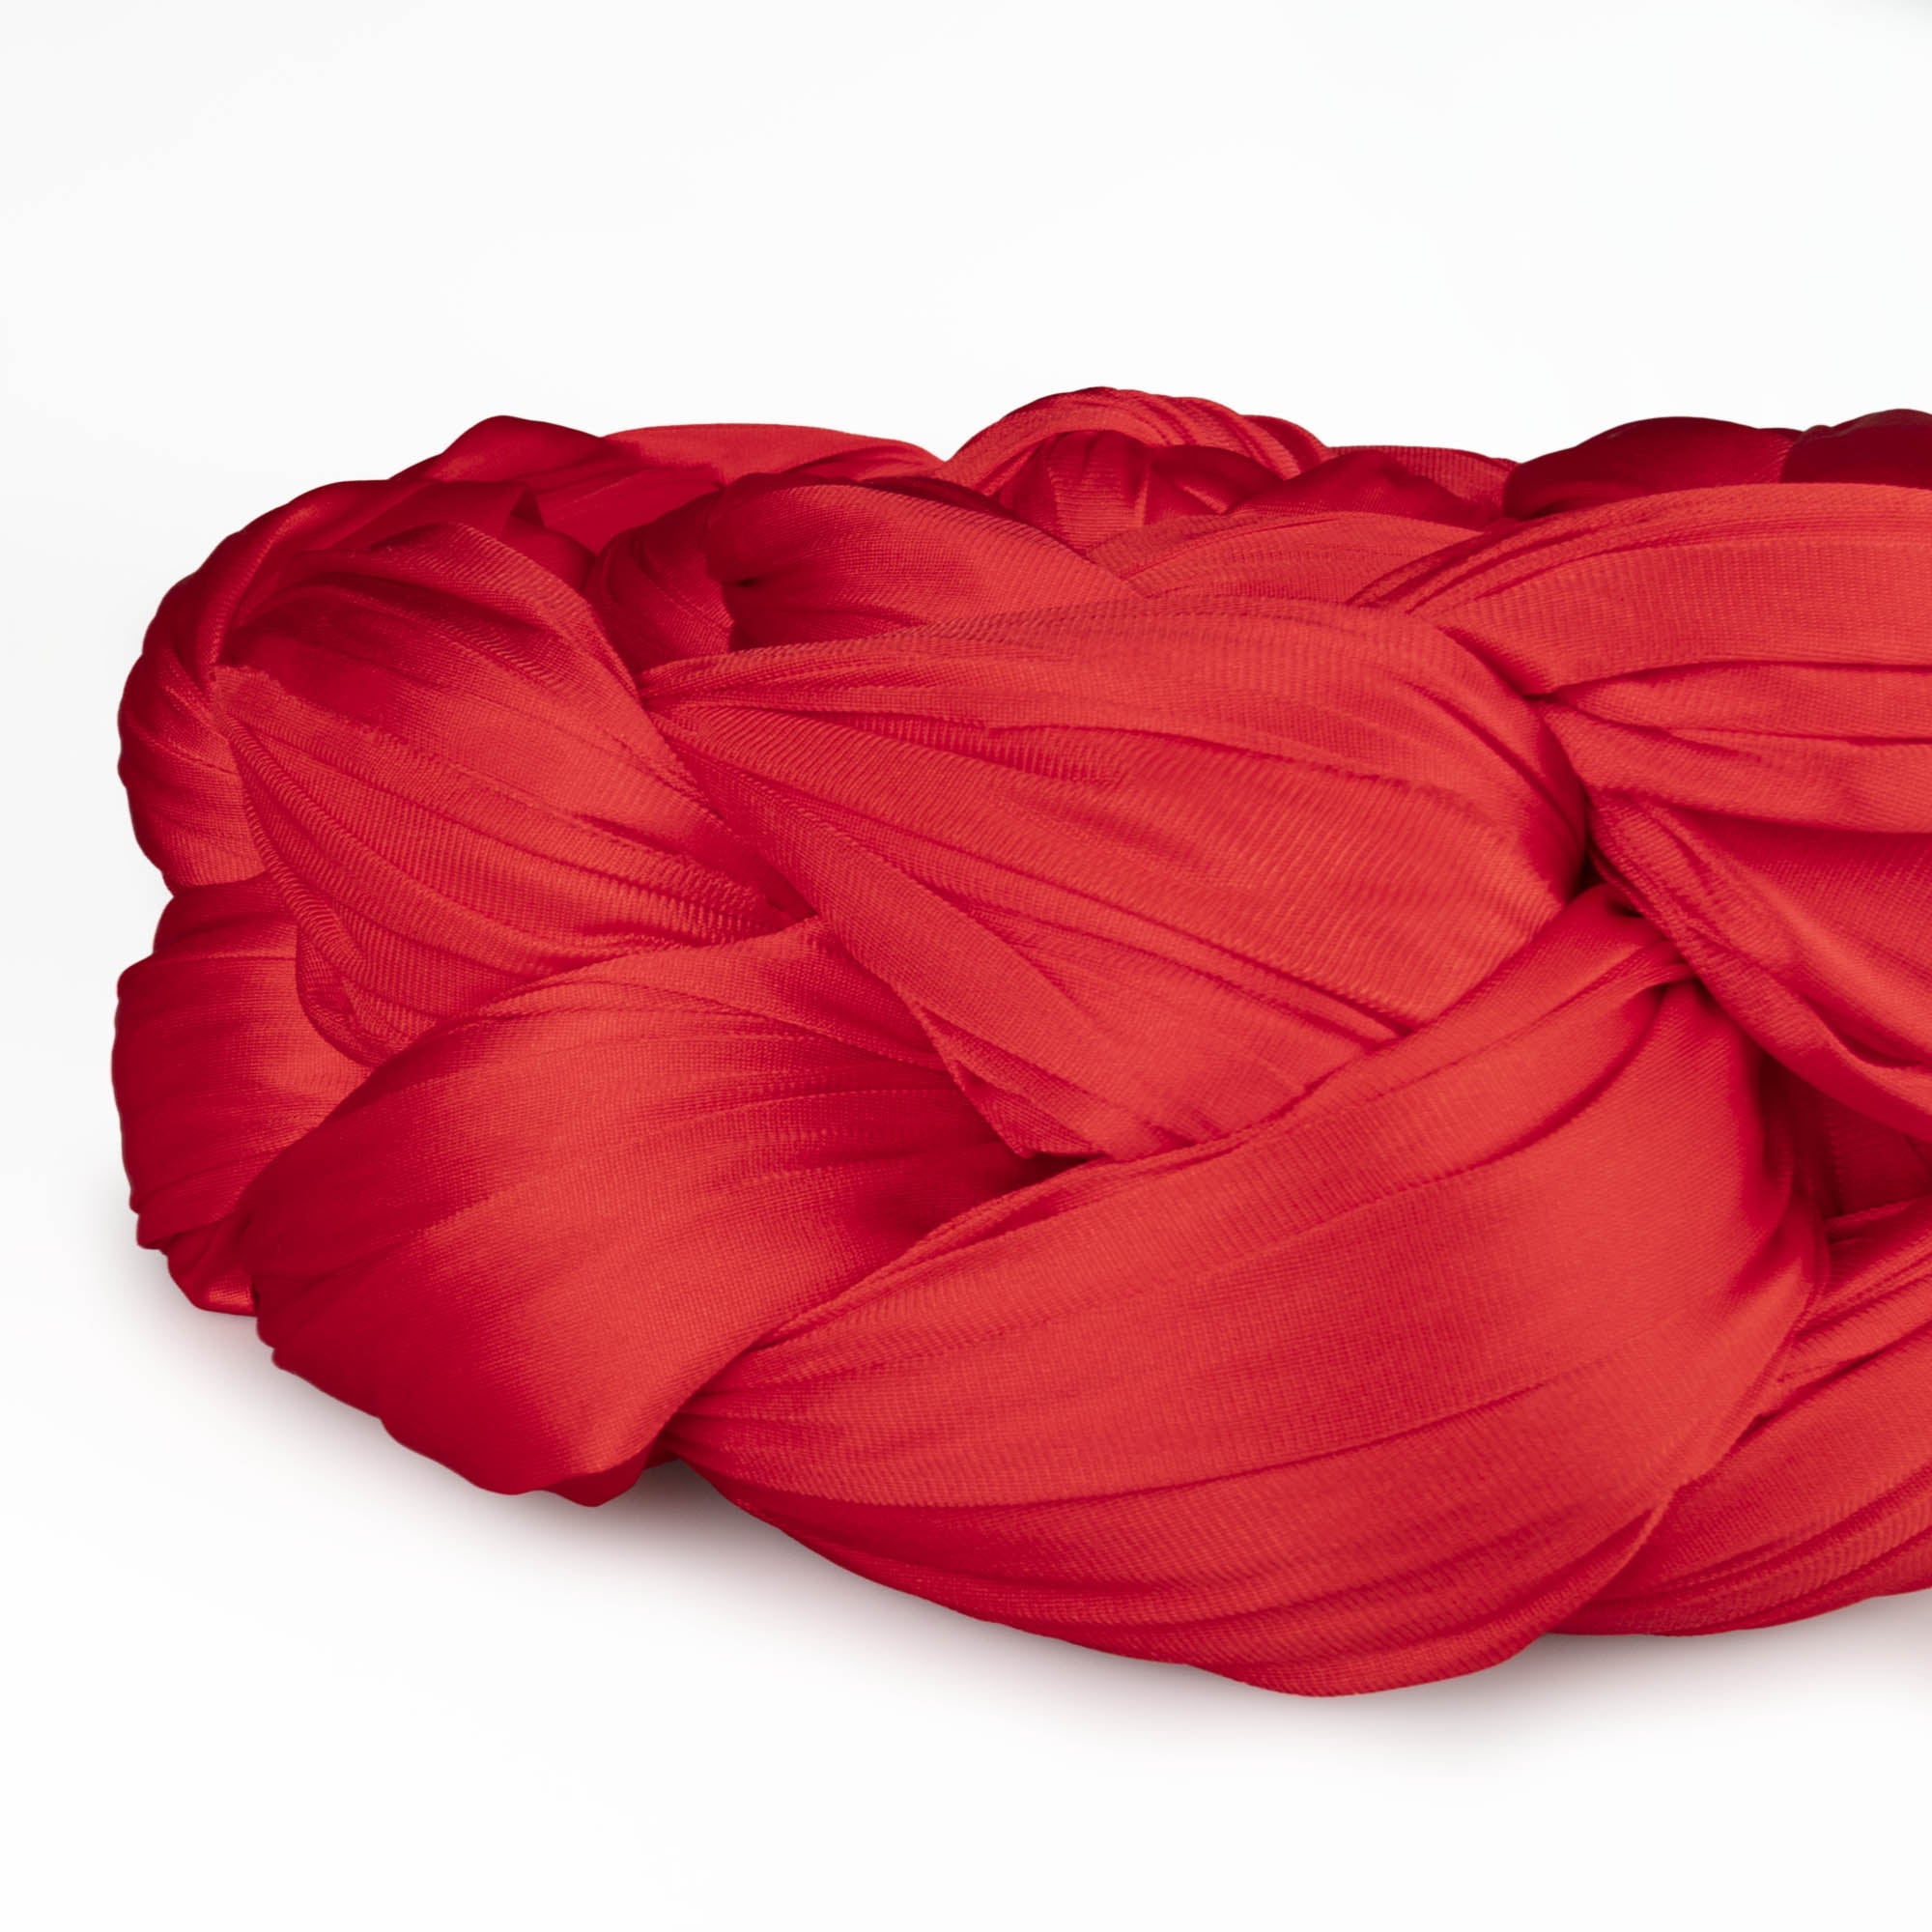 Red silk coiled